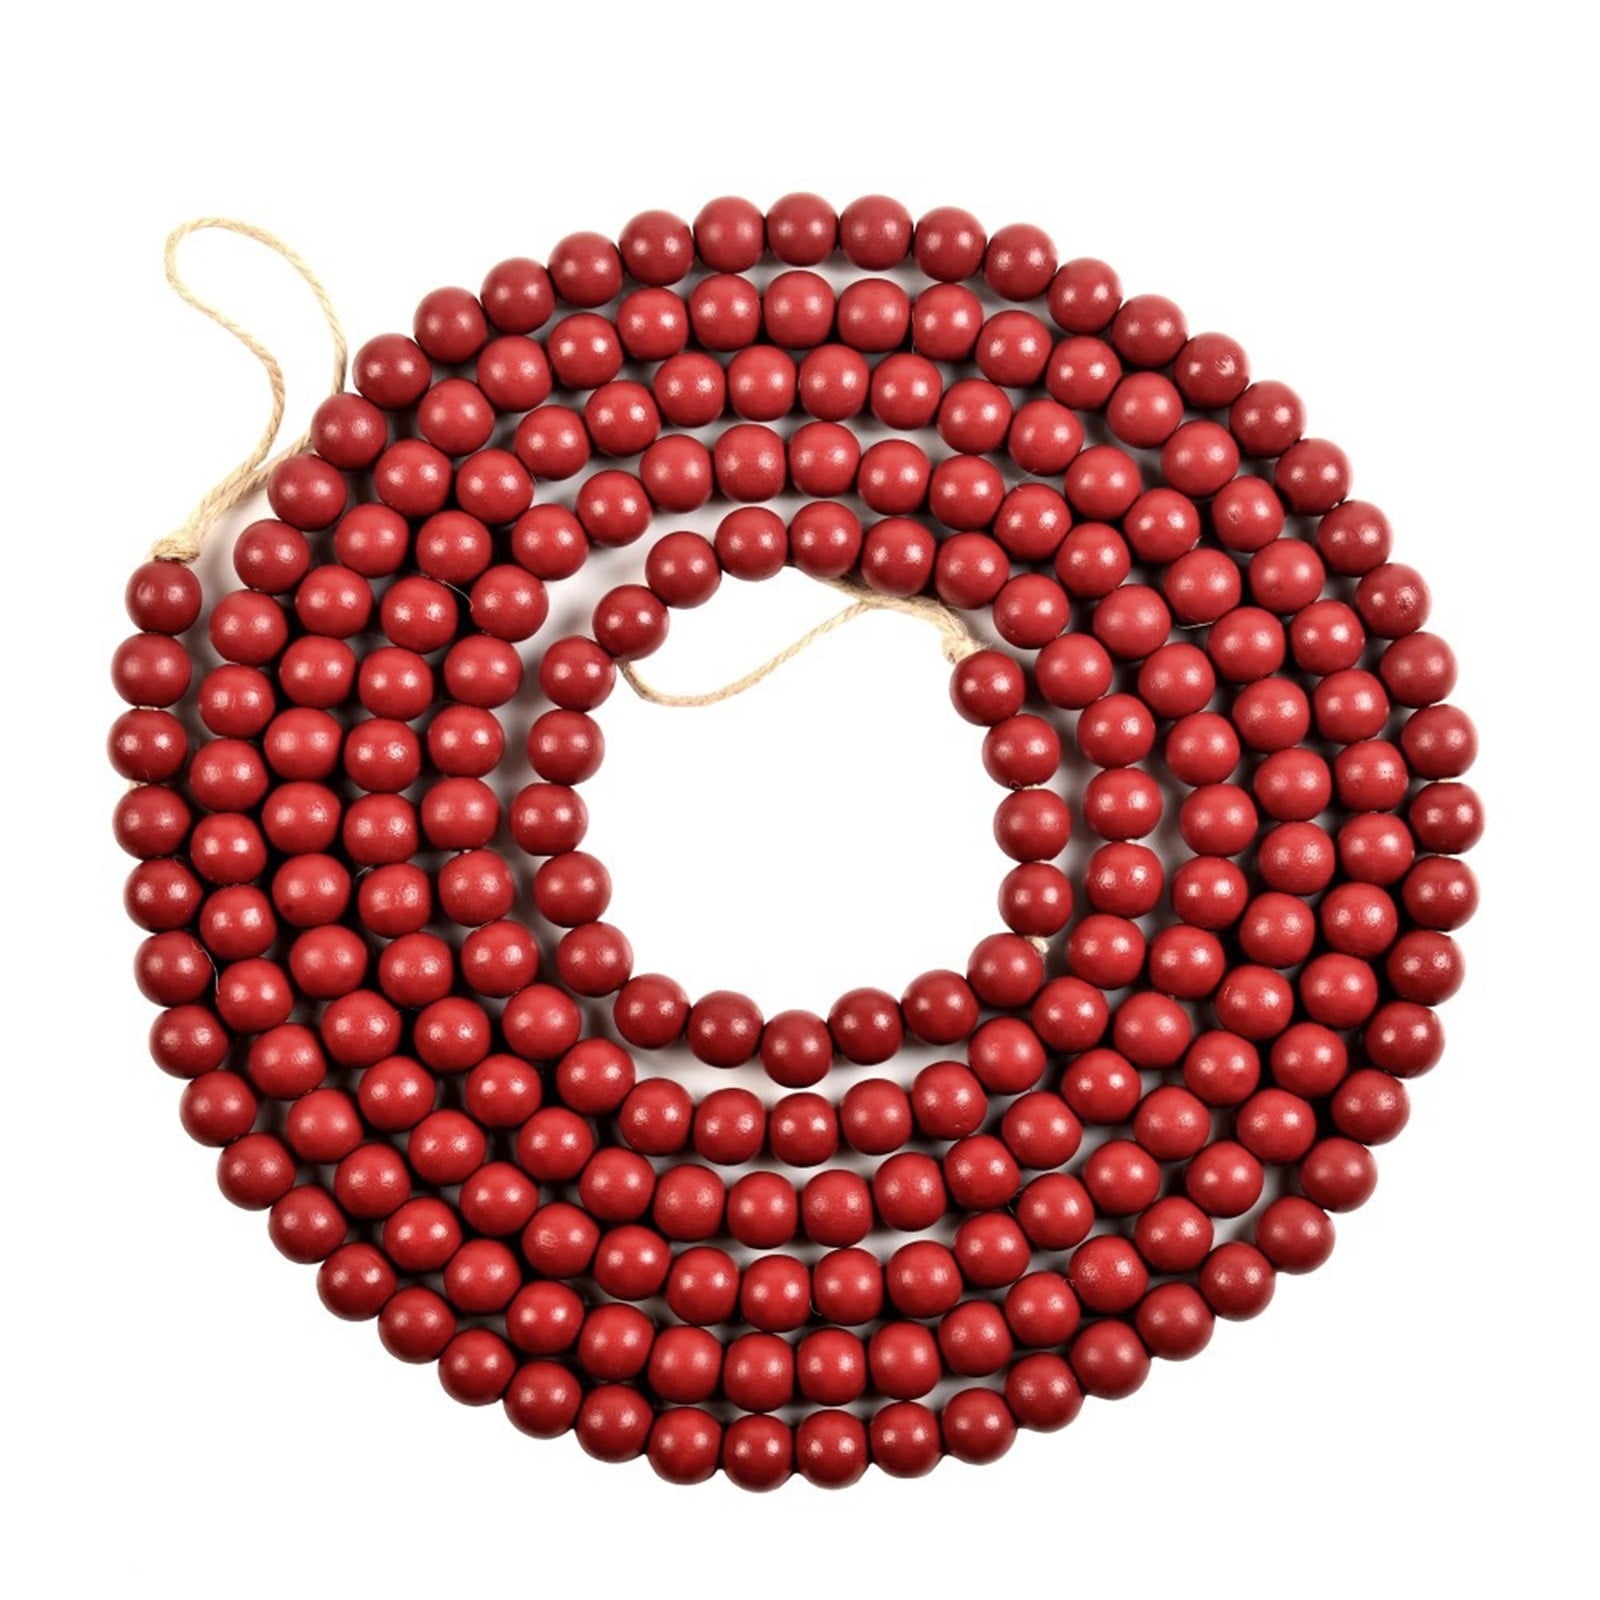 REOVE Christmas Wooden Bead Garland Bright Red Wood Bead Garland Christmas  Tree Holiday Decoration (Dark Red, 9 feet)